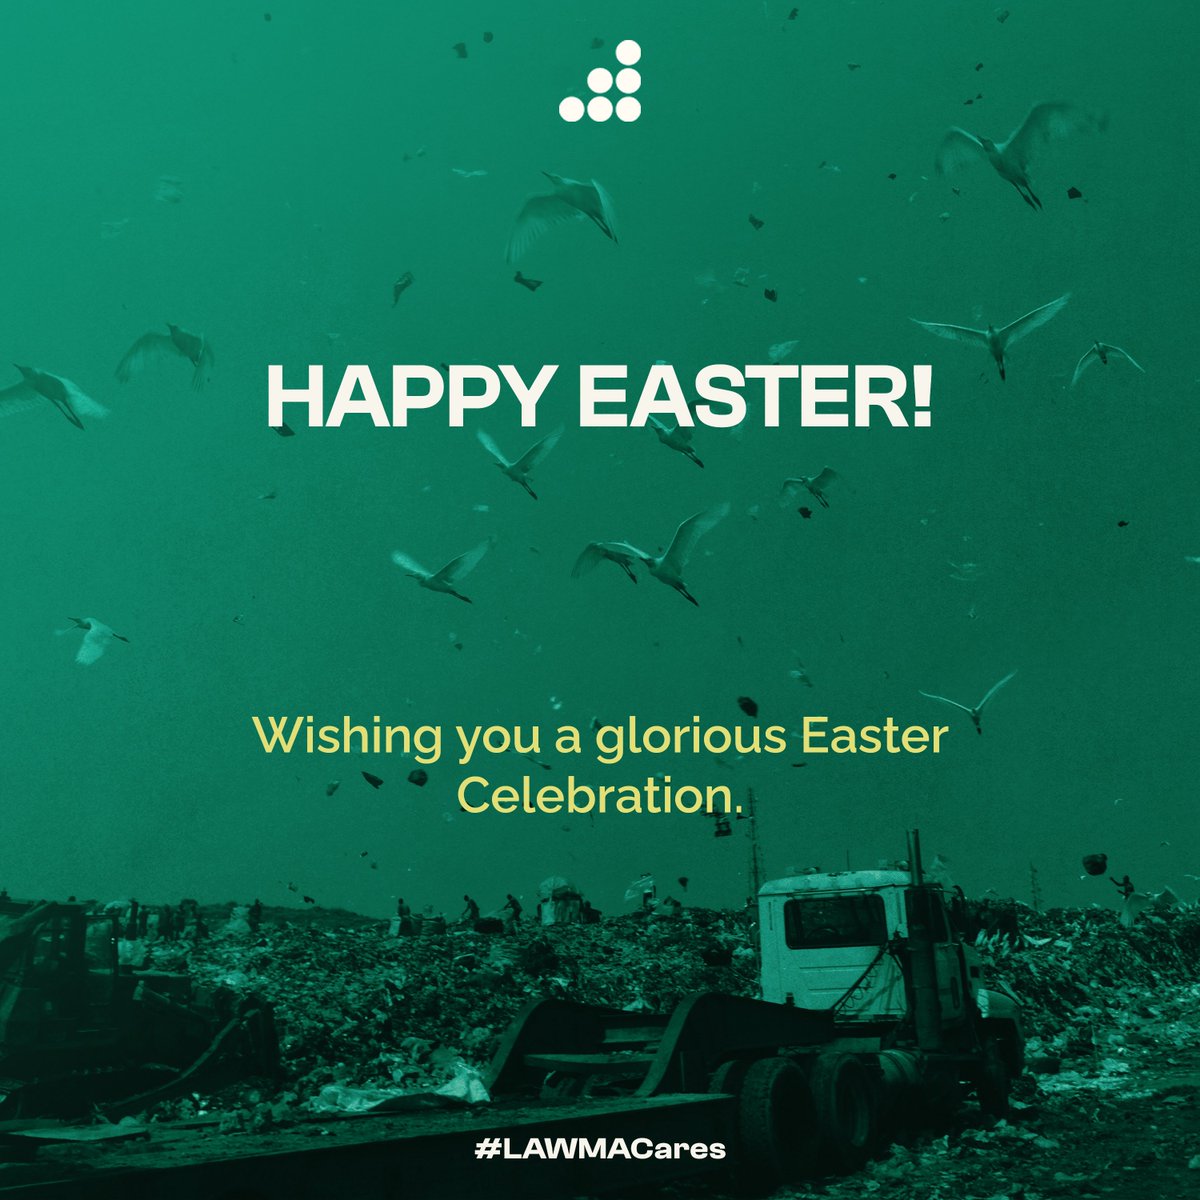 Celebrate this Easter by spreading joy and sustainability. Remember to dispose of your waste responsibly and keep your environment clean! Wishing you a happy and eco-friendly Easter from all of us at LAWMA 💚♻️ #LAWMAcares